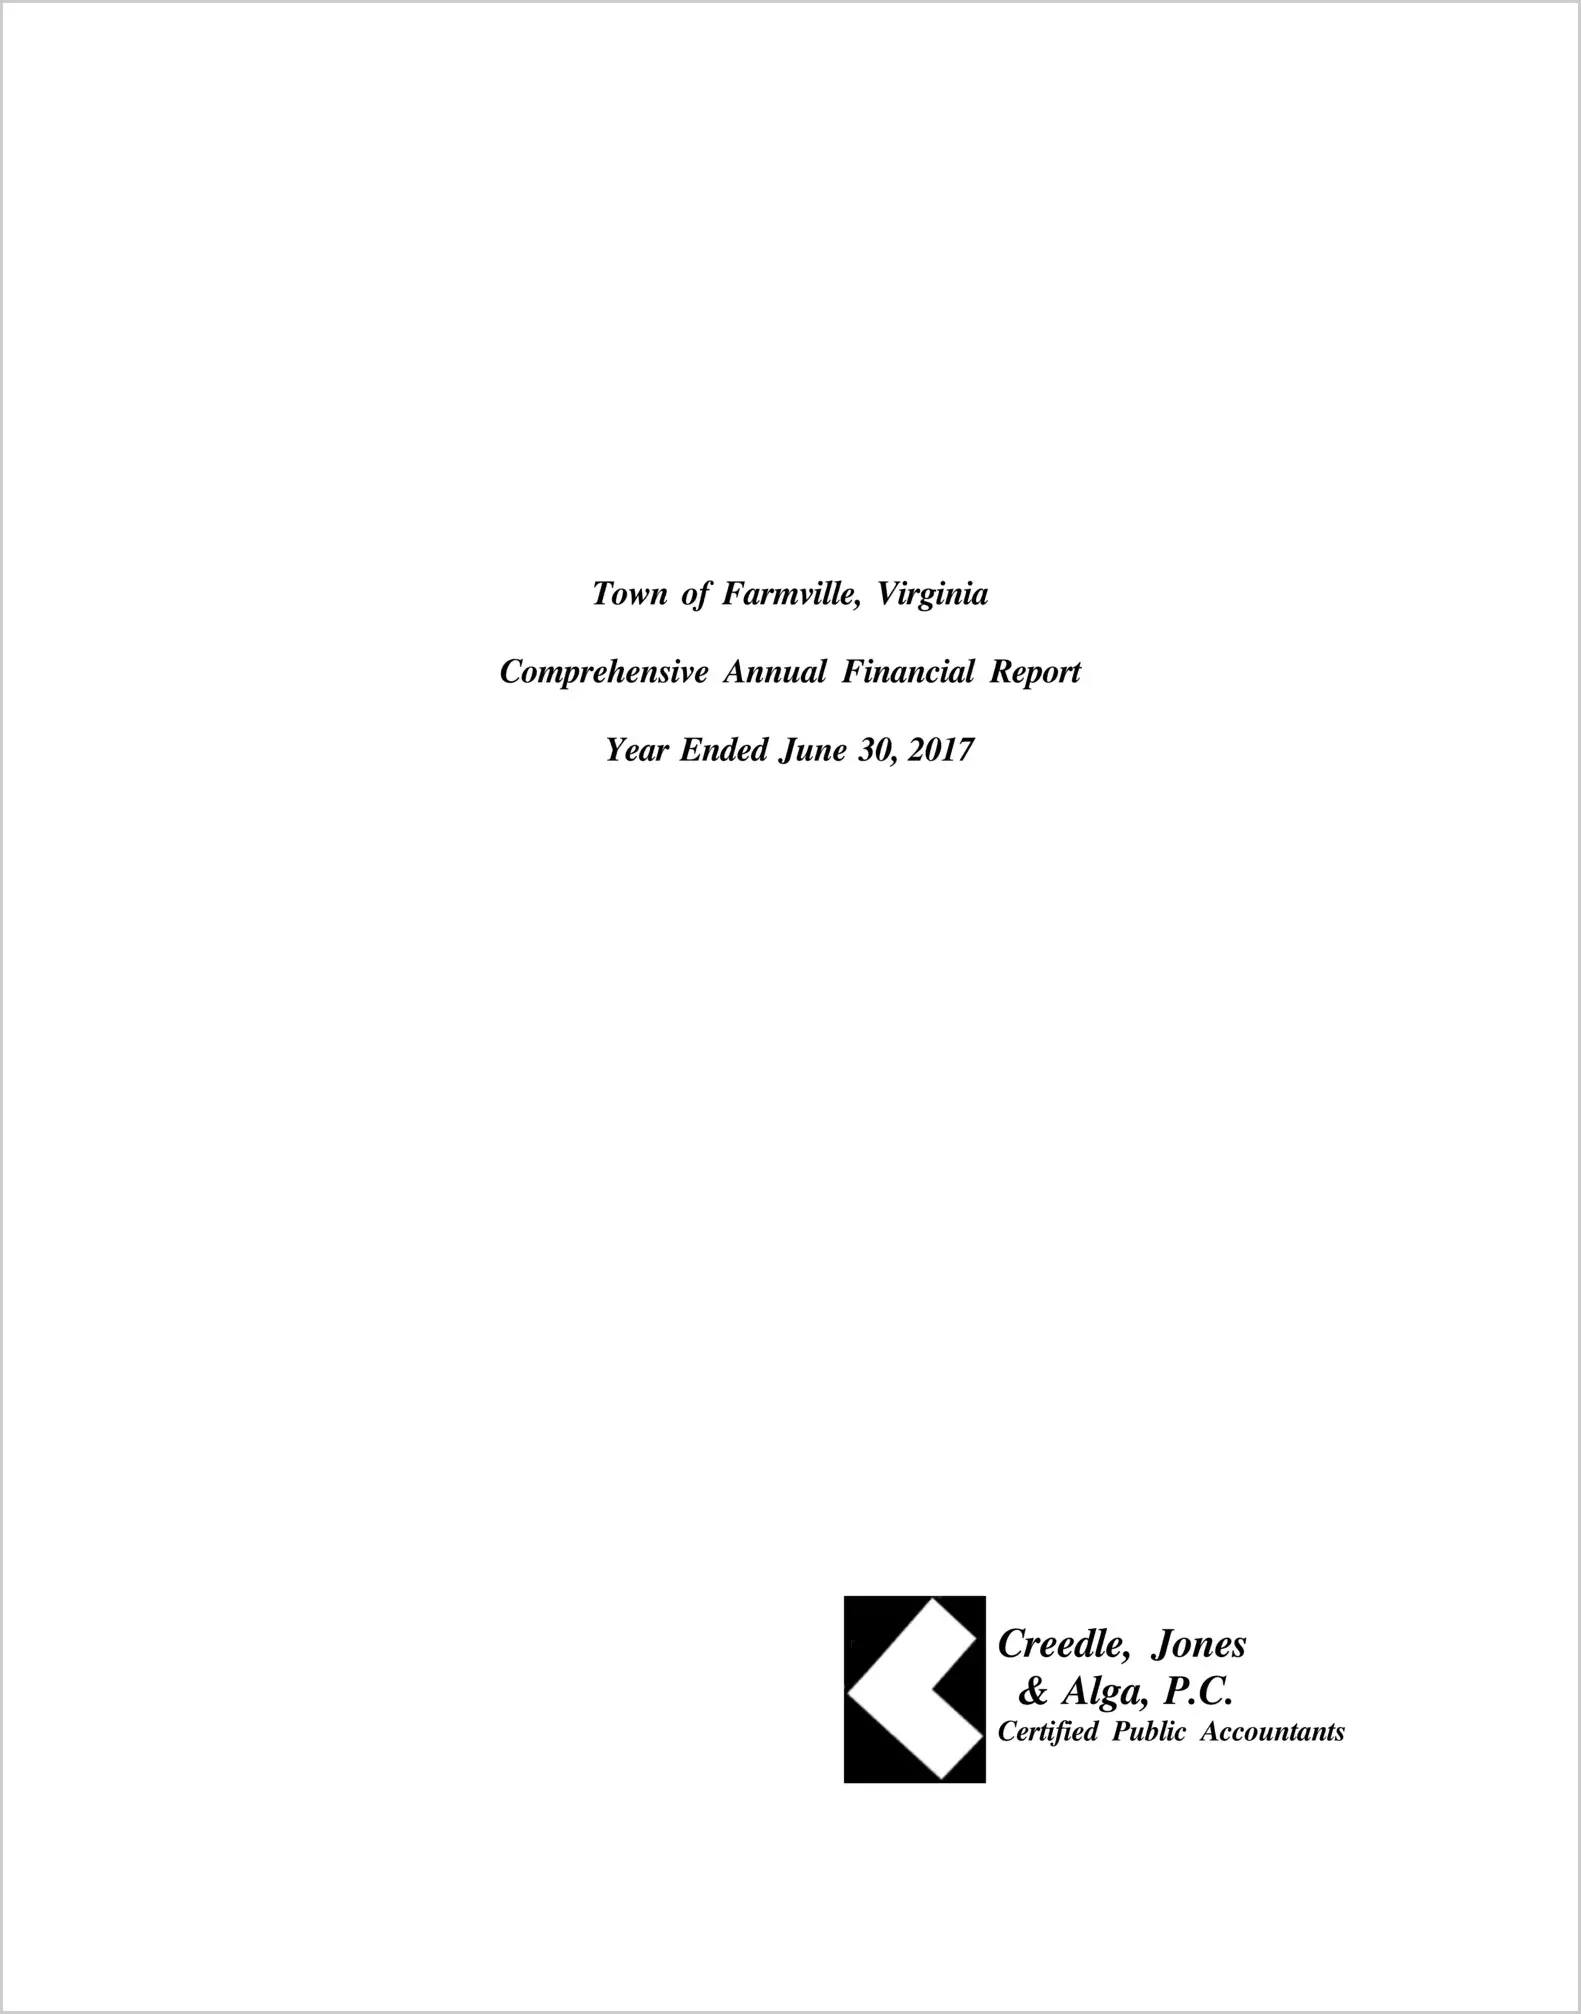 2017 Annual Financial Report for Town of Farmville